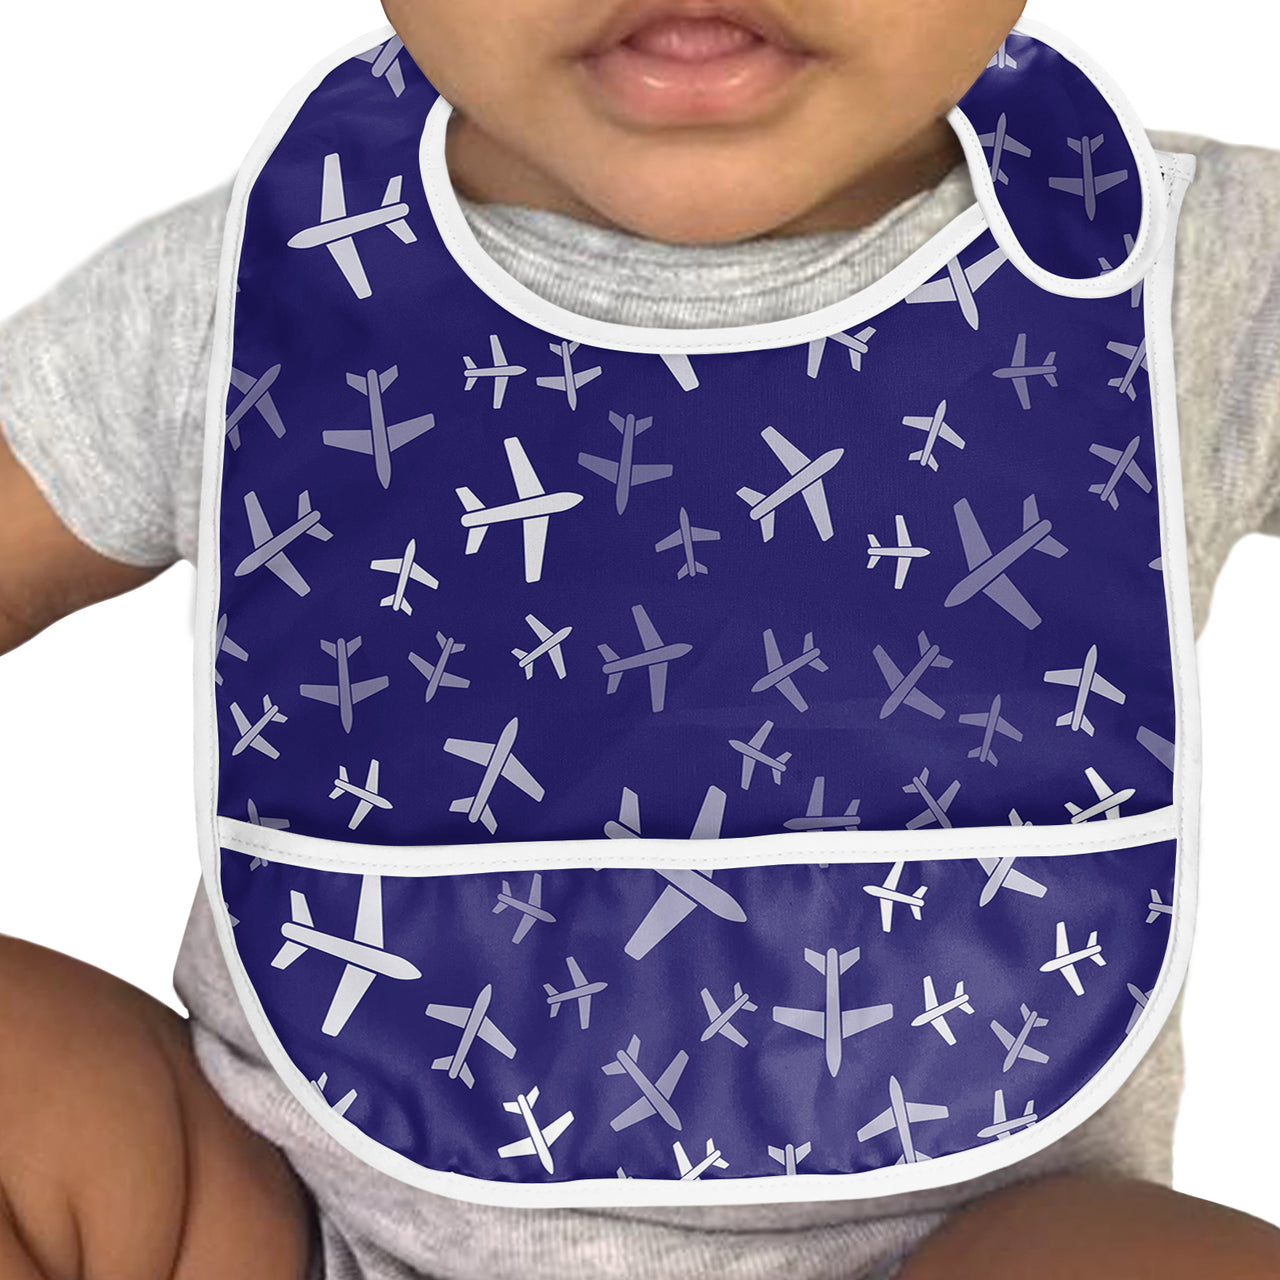 Different Sizes Seamless Airplanes Designed Baby Bib